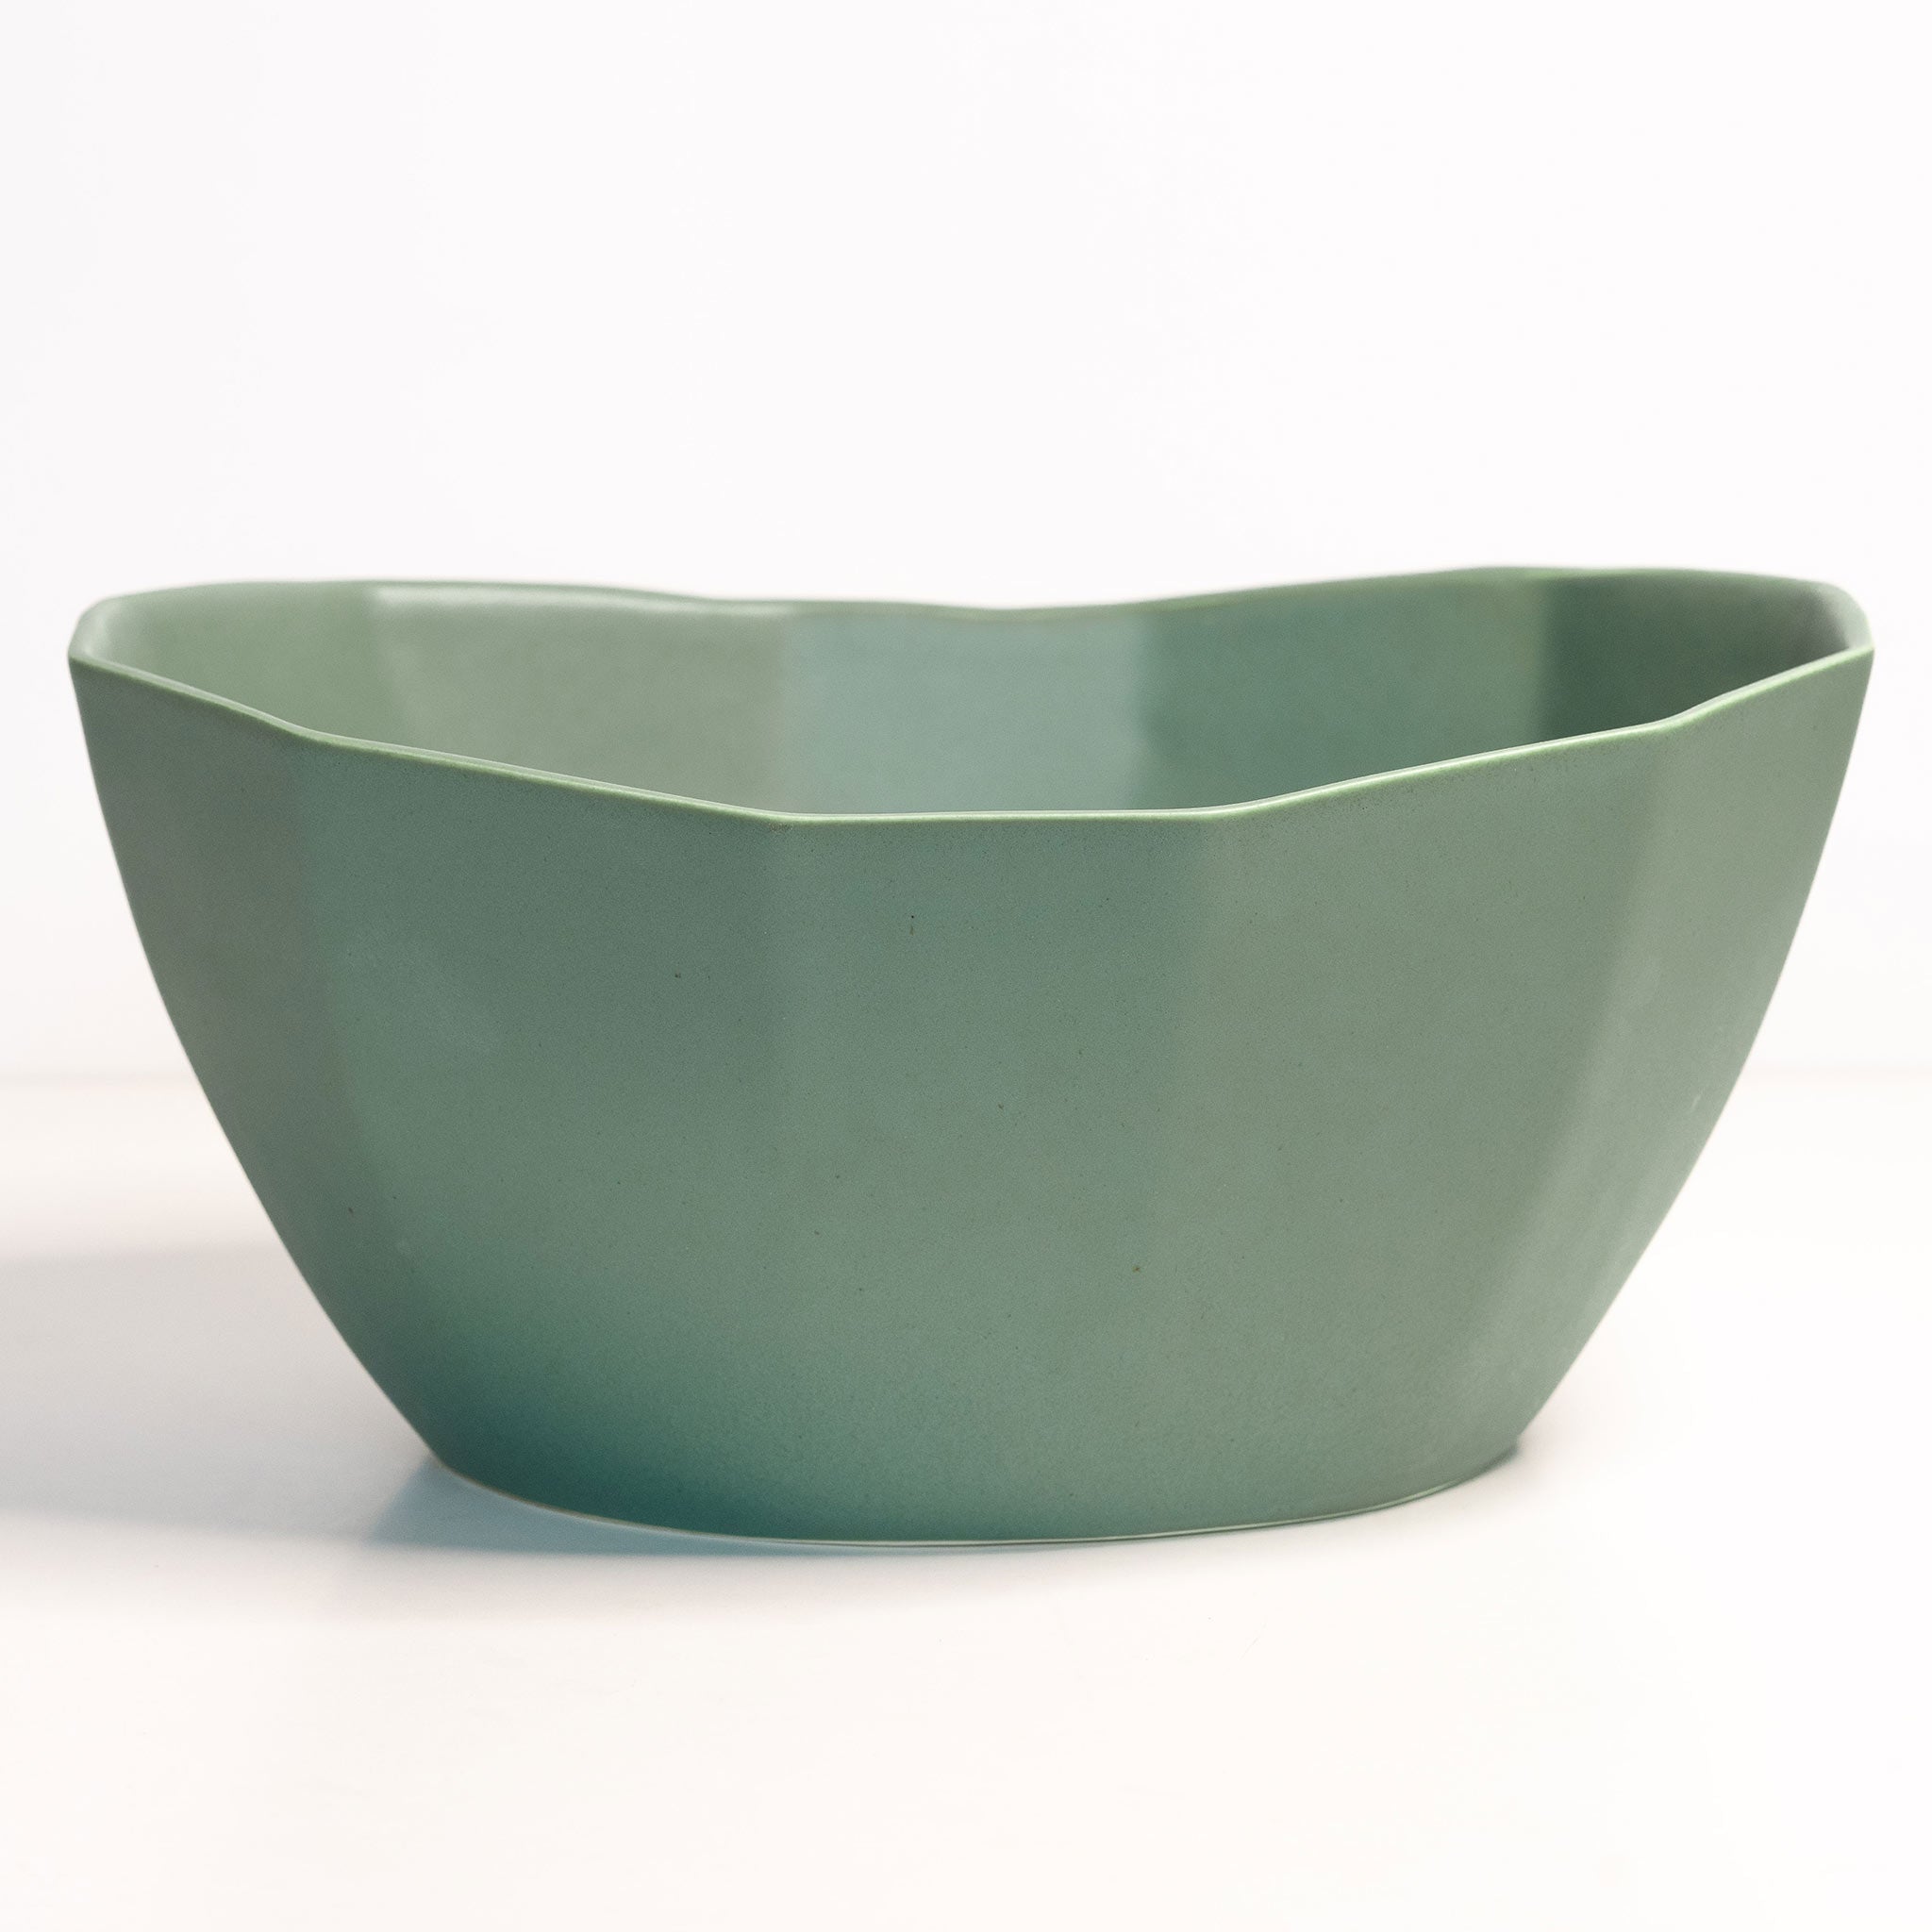 Large Porcelain Nesting Bowl Rosemary Green The Bright Angle